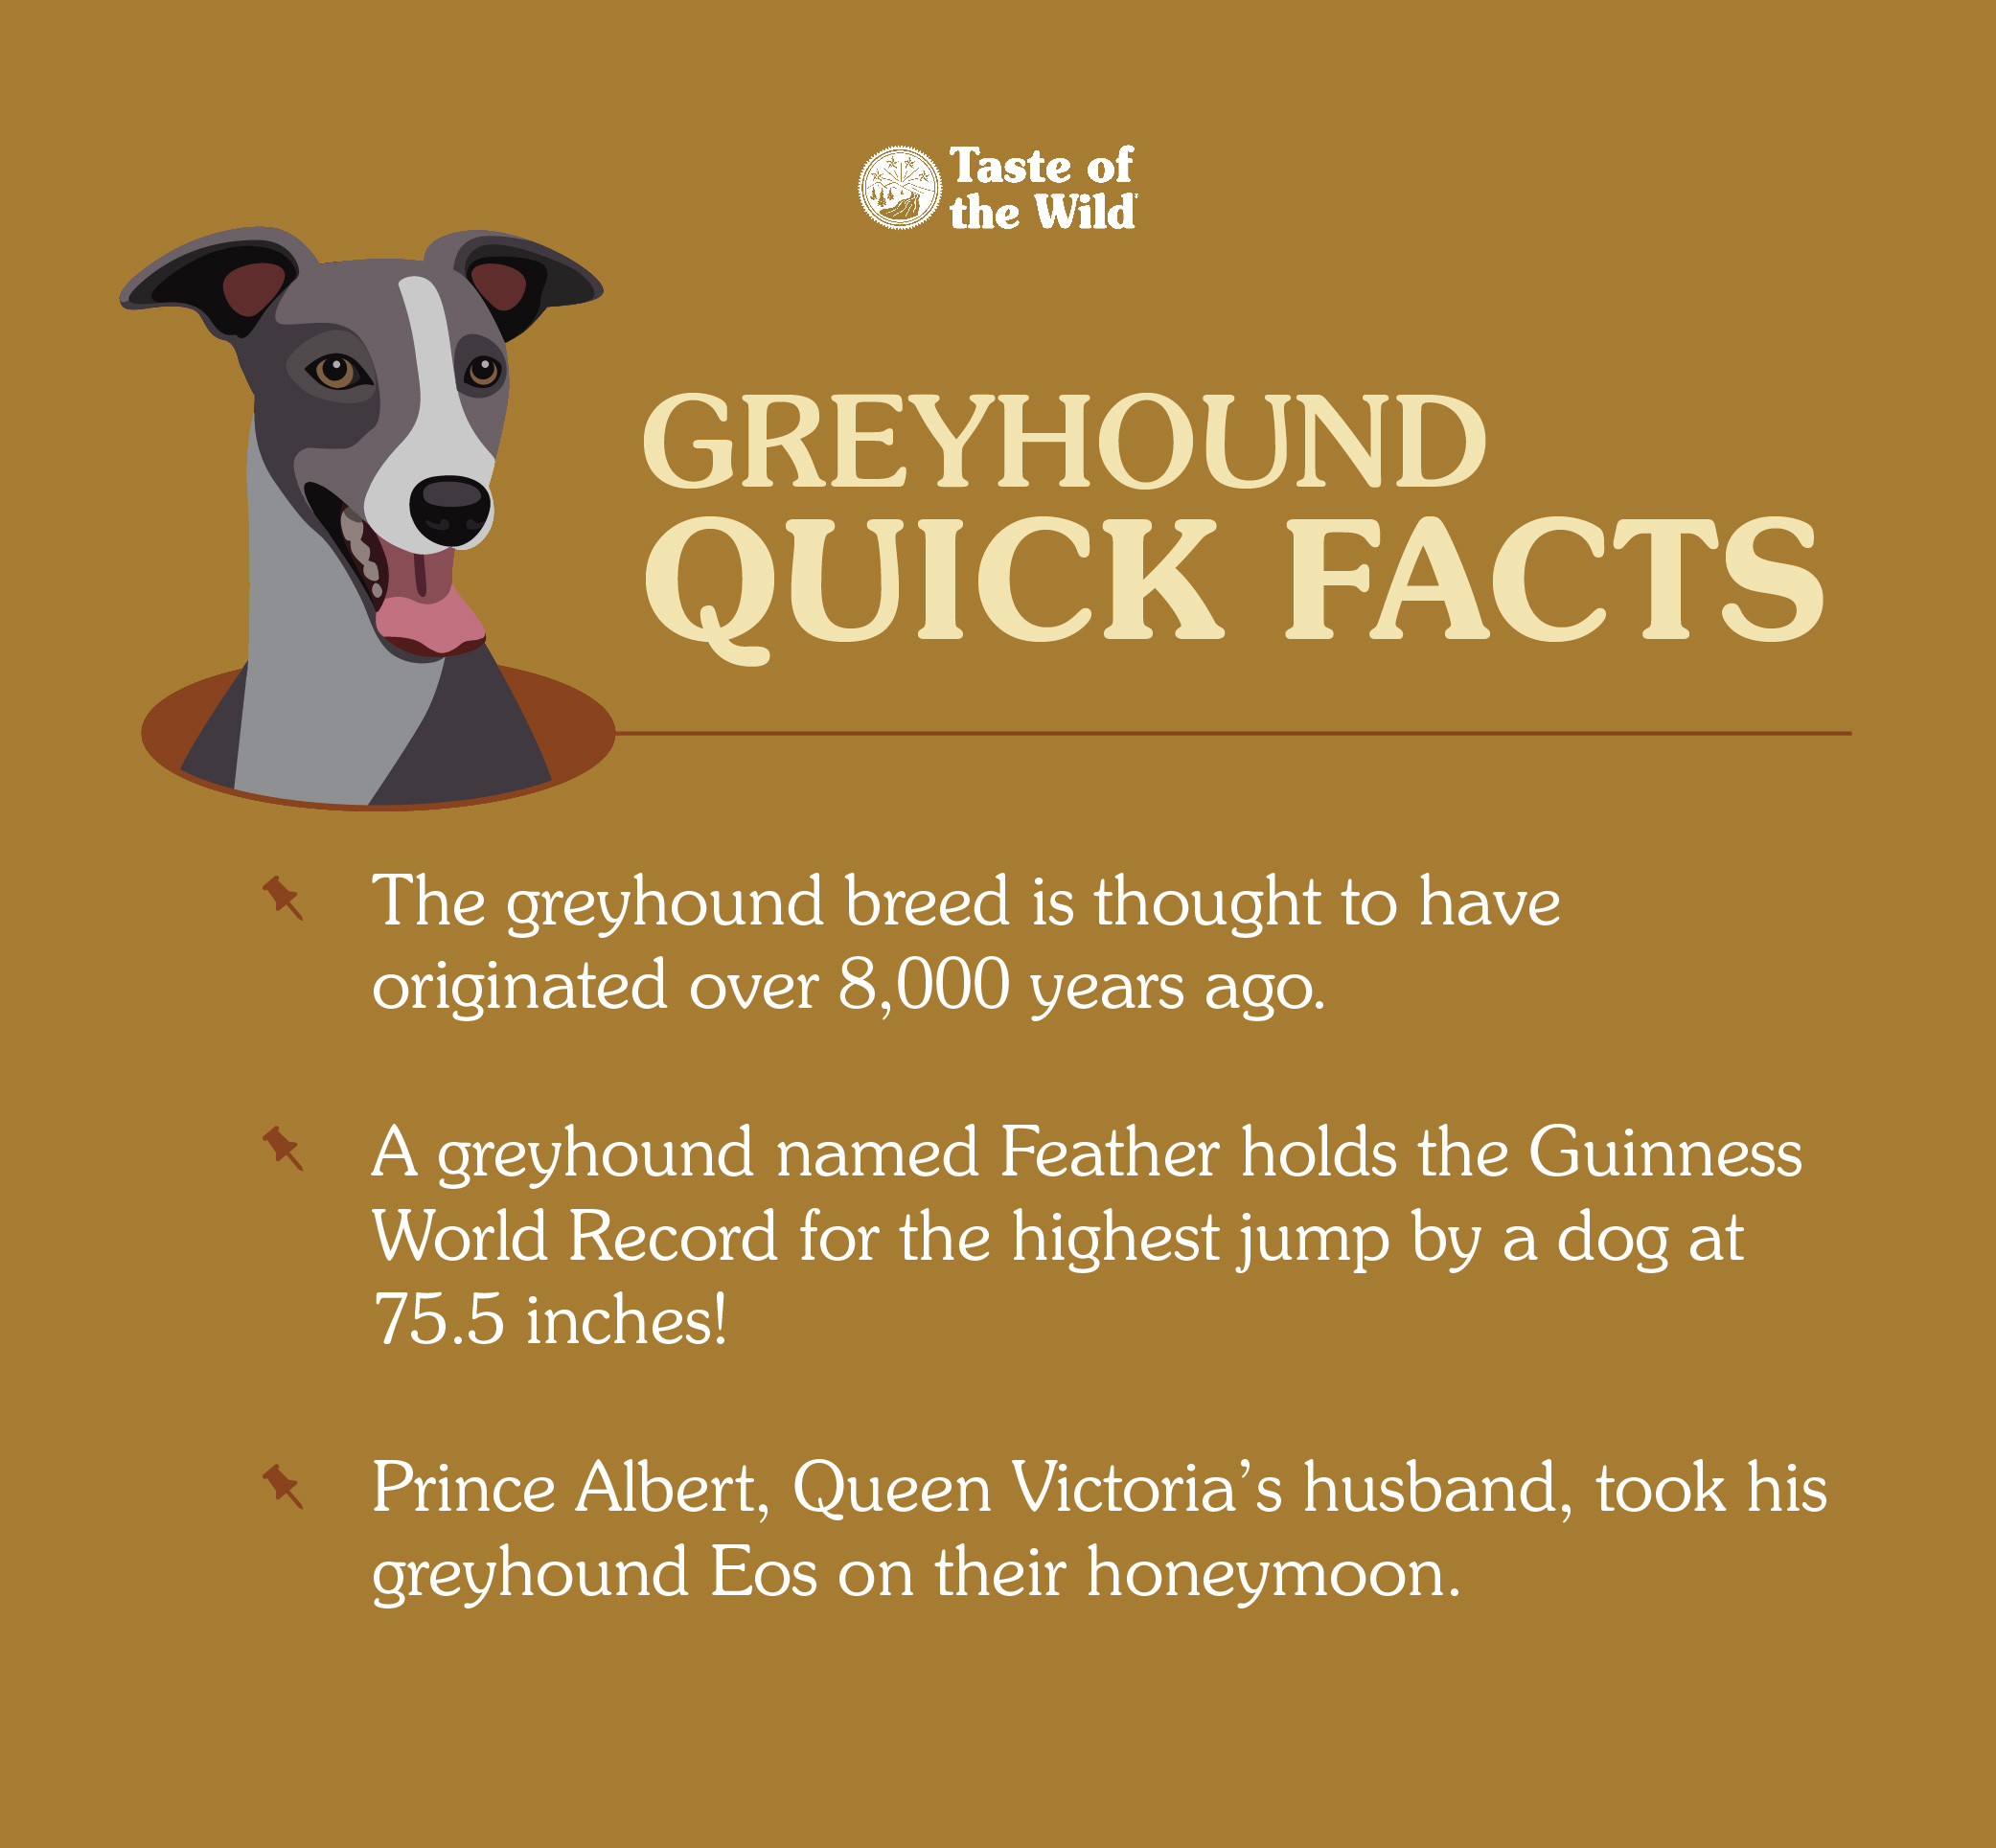 A cartoon greyhound with his tongue out next to display text ‘greyhound quick facts’.